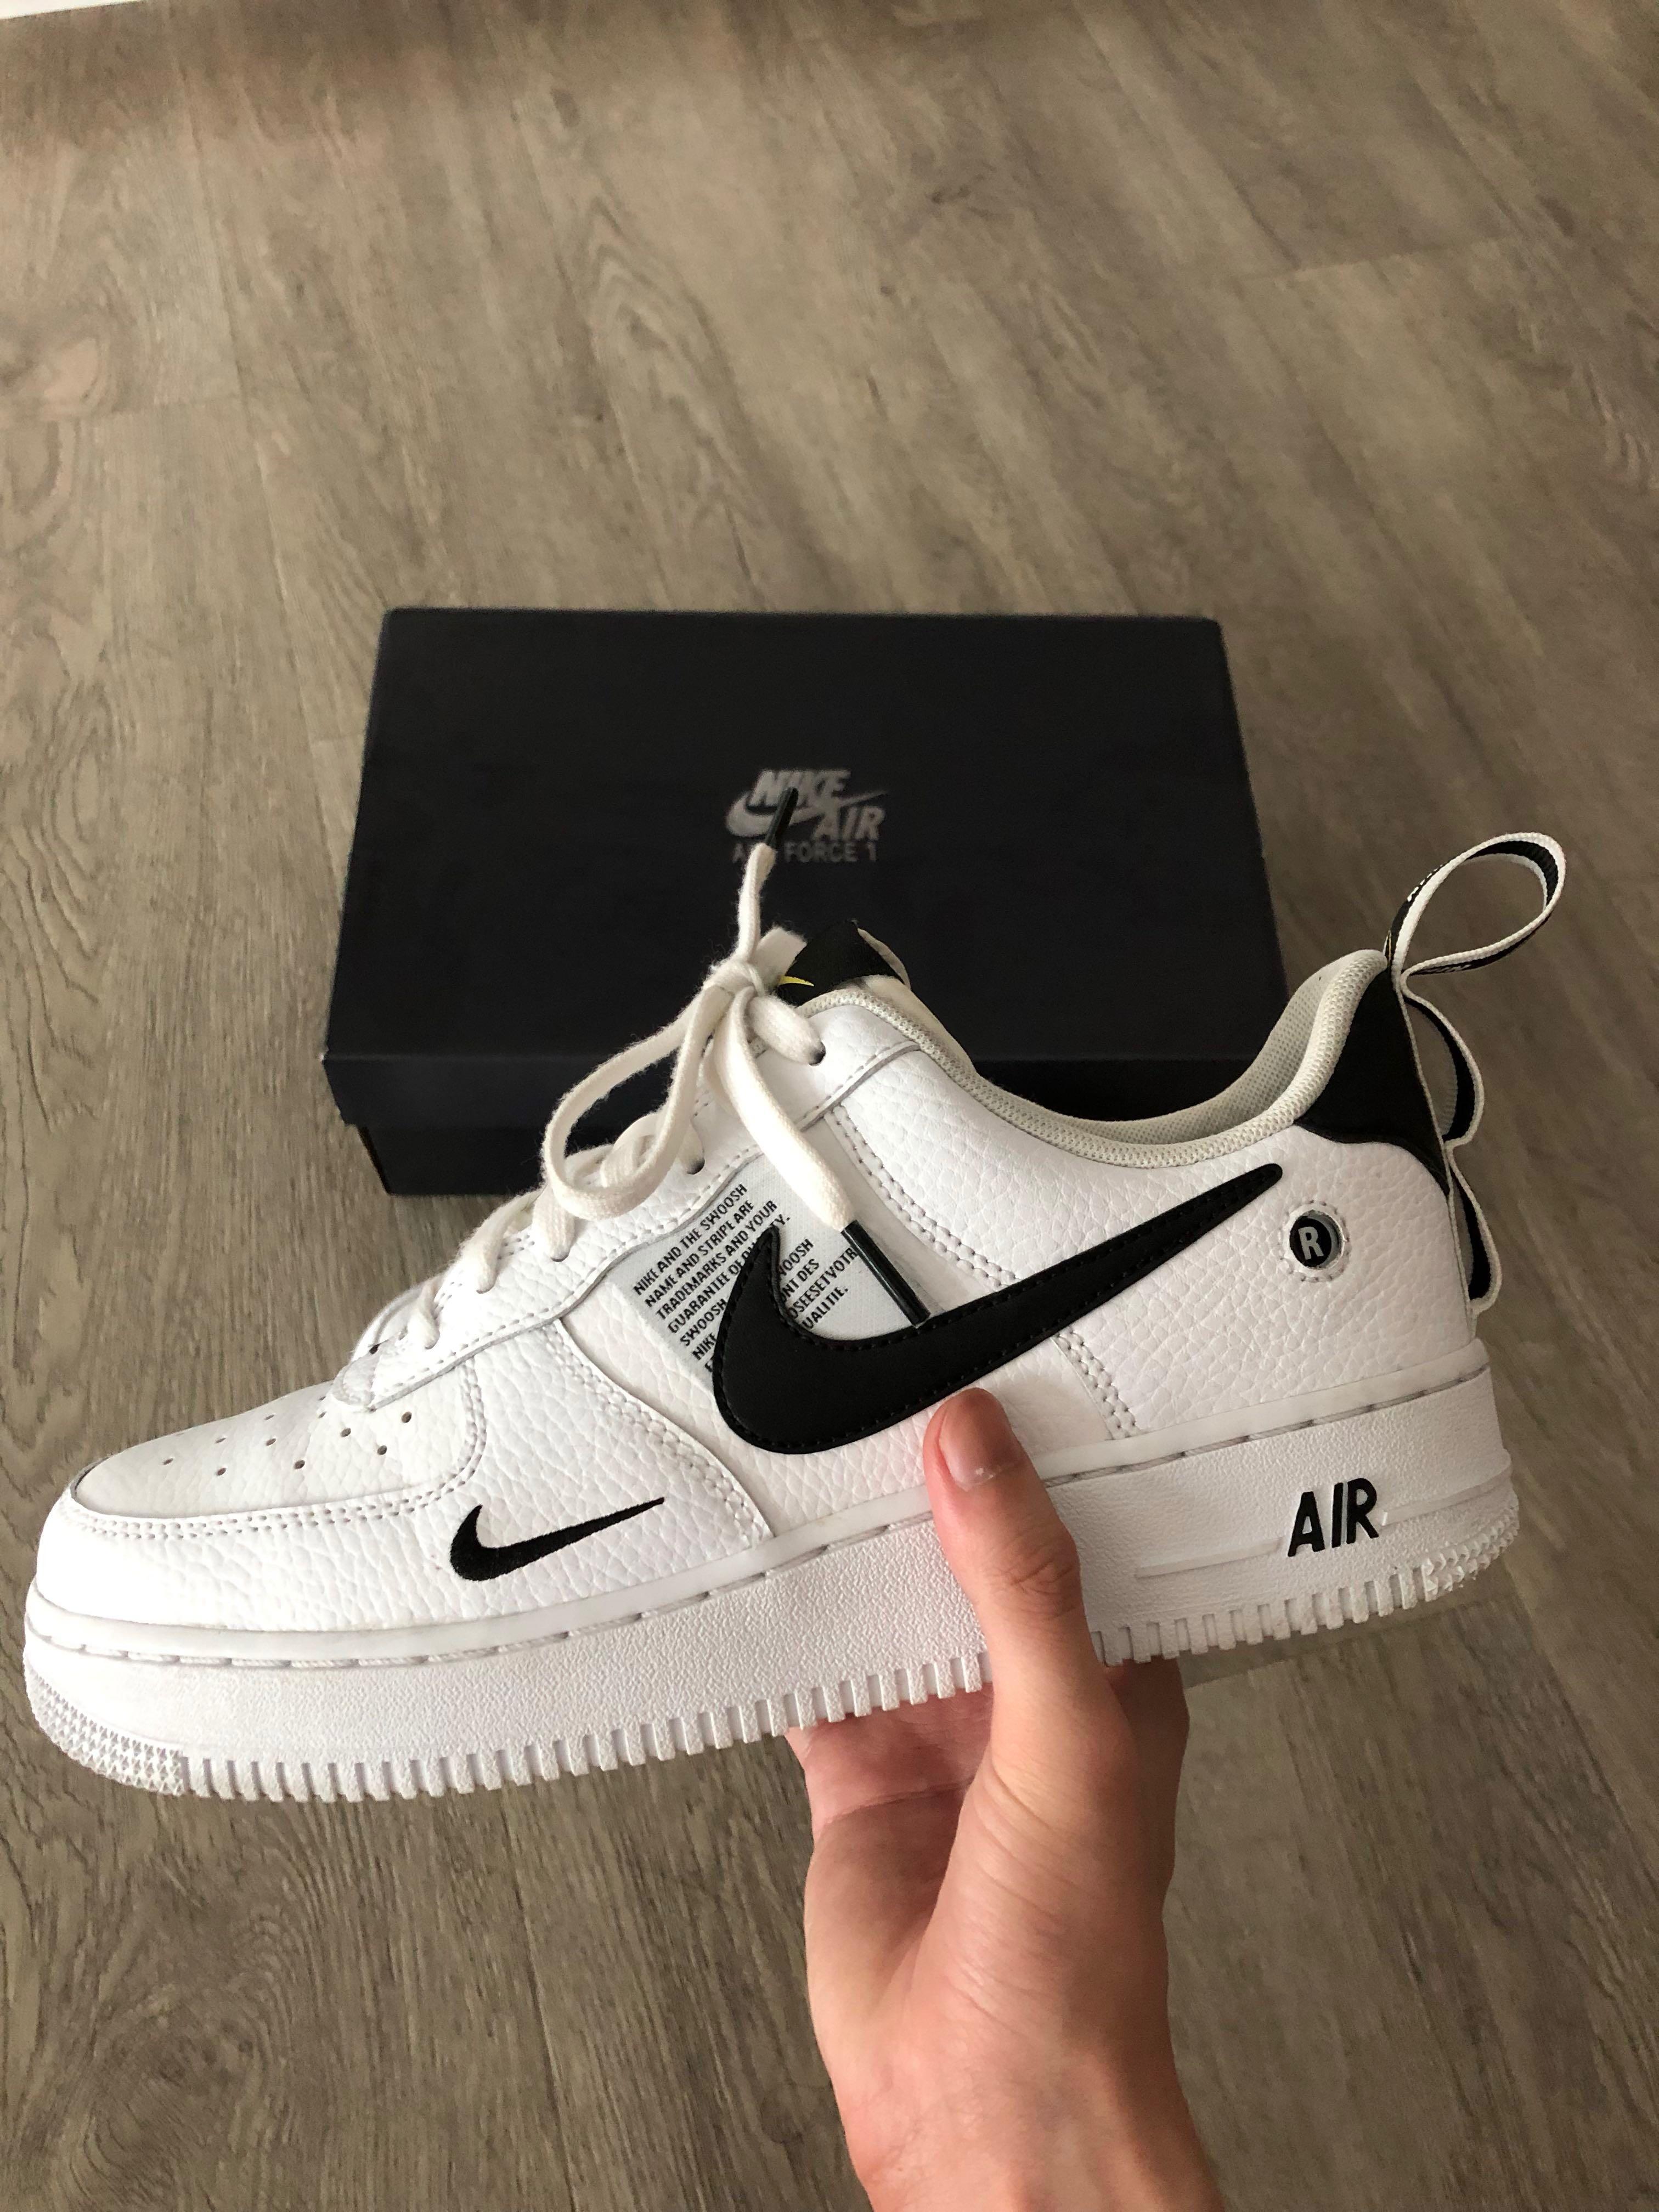 nike air force 1 lv8 utility size 9